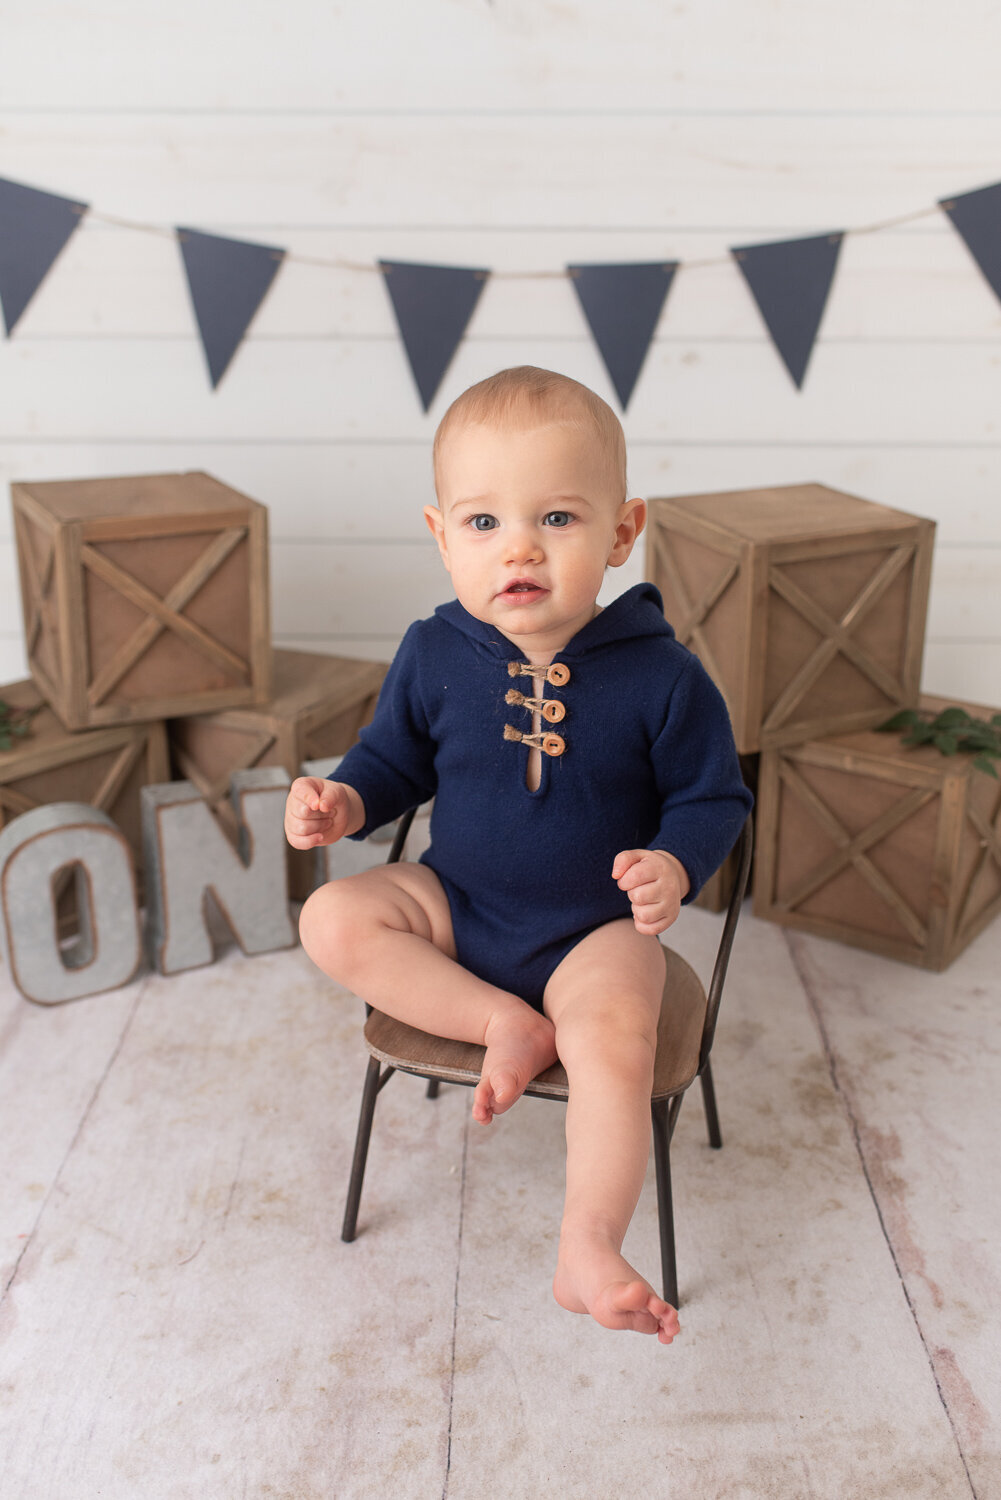 One year old boy on his first birthday at his cake smash session Blue, tan and white cake smash session at studio in Canton, CT |Sharon Leger Photography | Canton, CT Newborn & Family Photographer